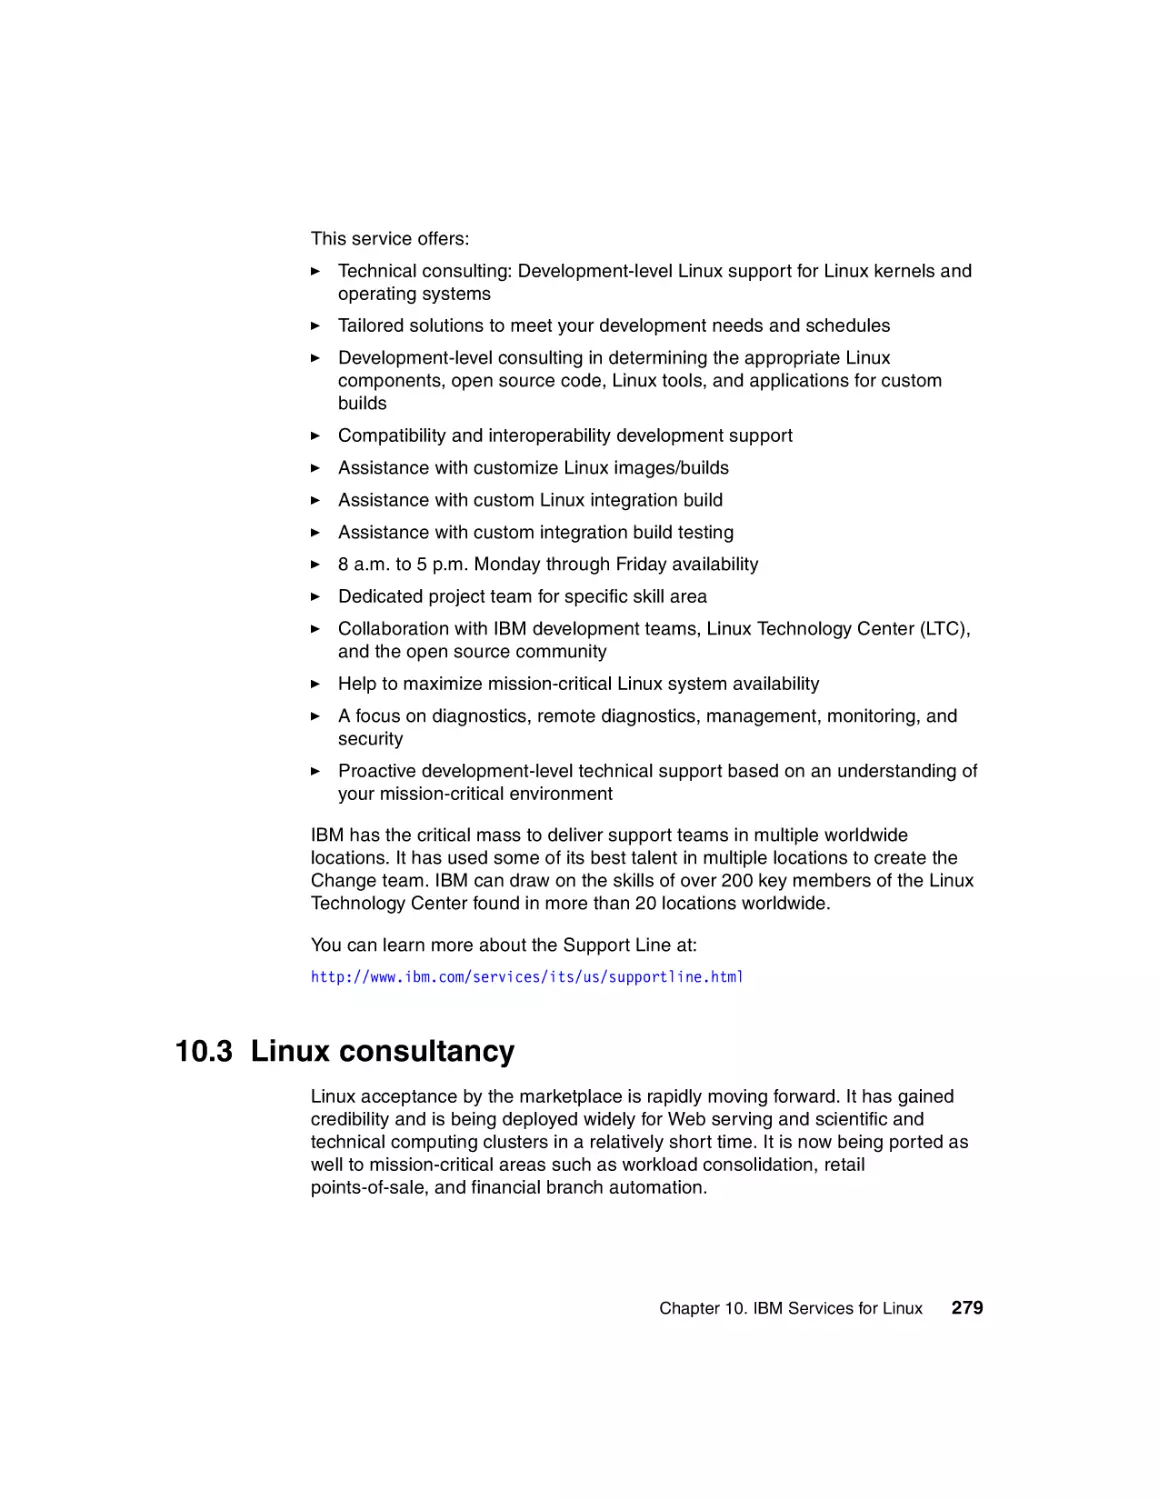 10.3 Linux consultancy